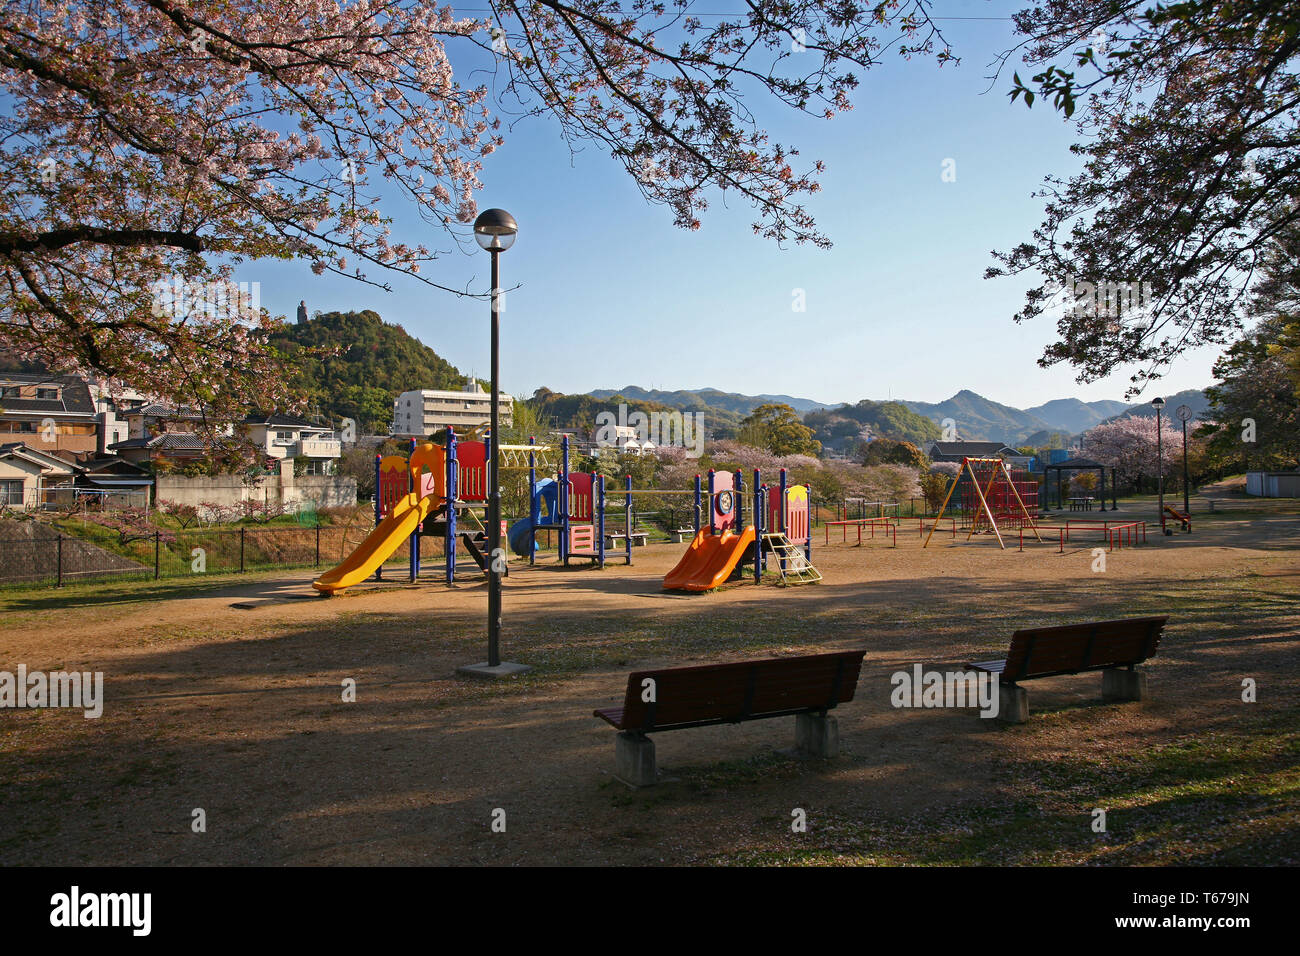 small park and playgound with cherry blossoms in Japan Stock Photo